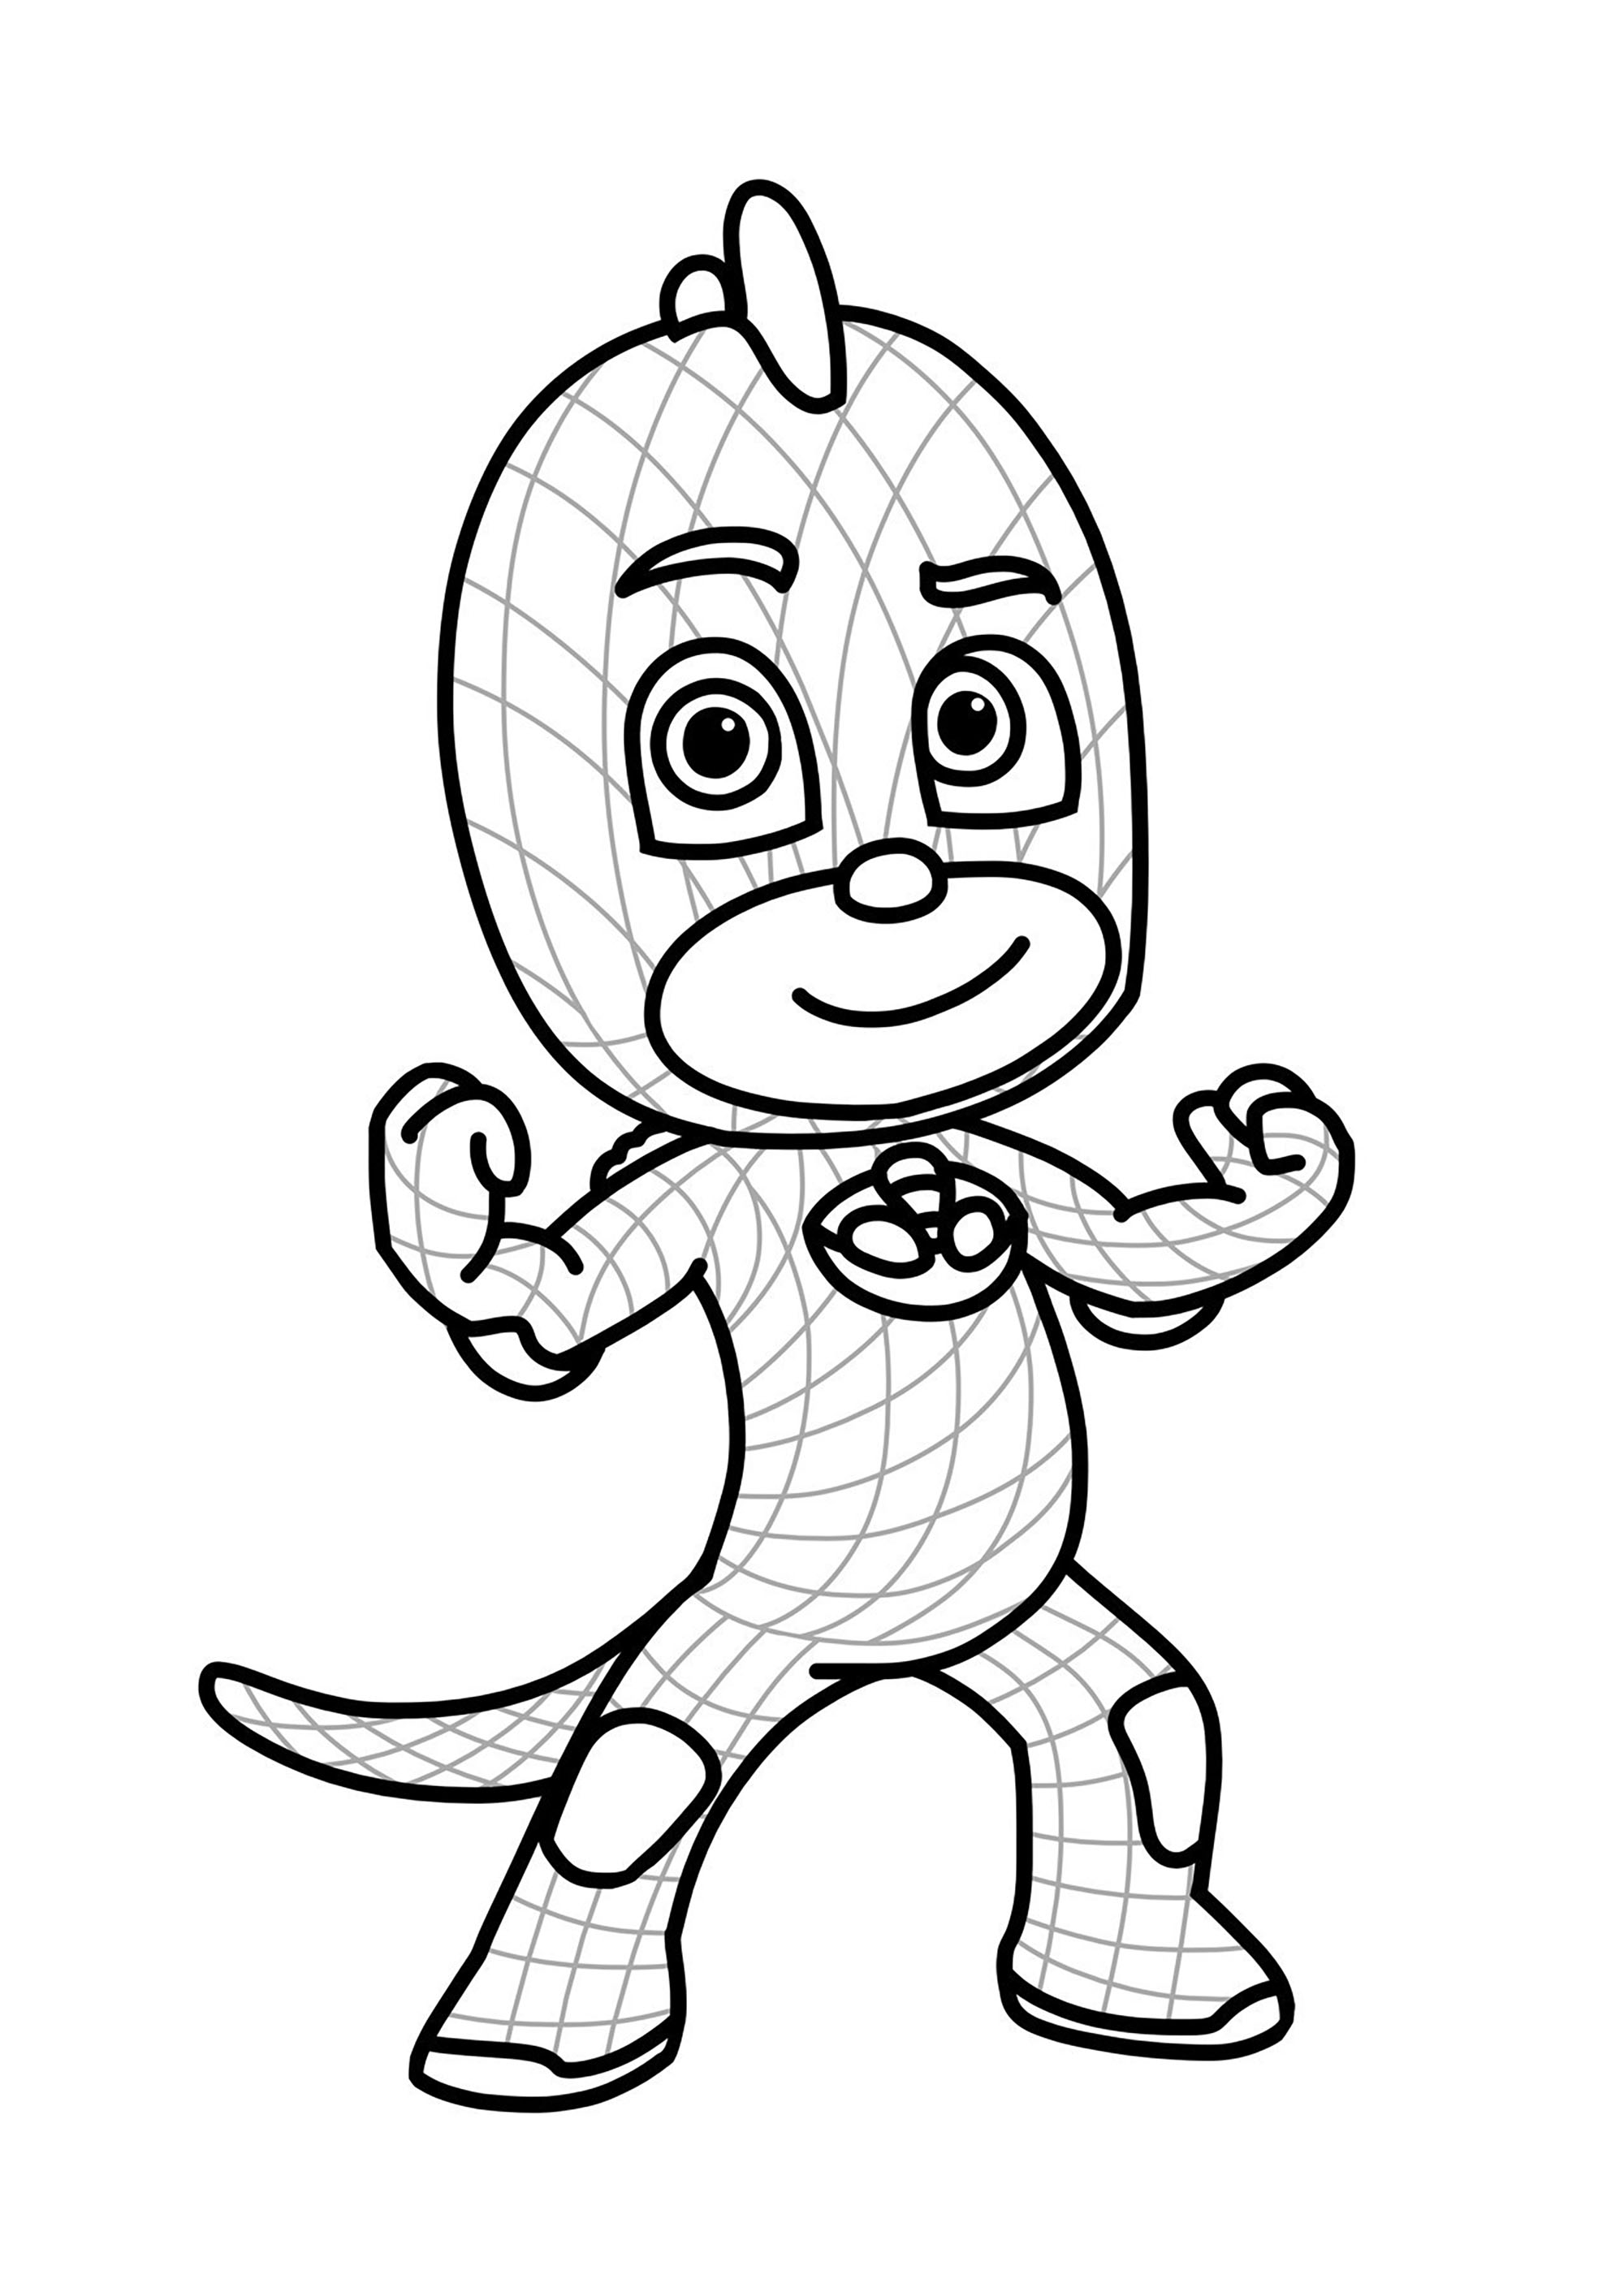 Pj Masks Coloring Page – childrencoloring.us